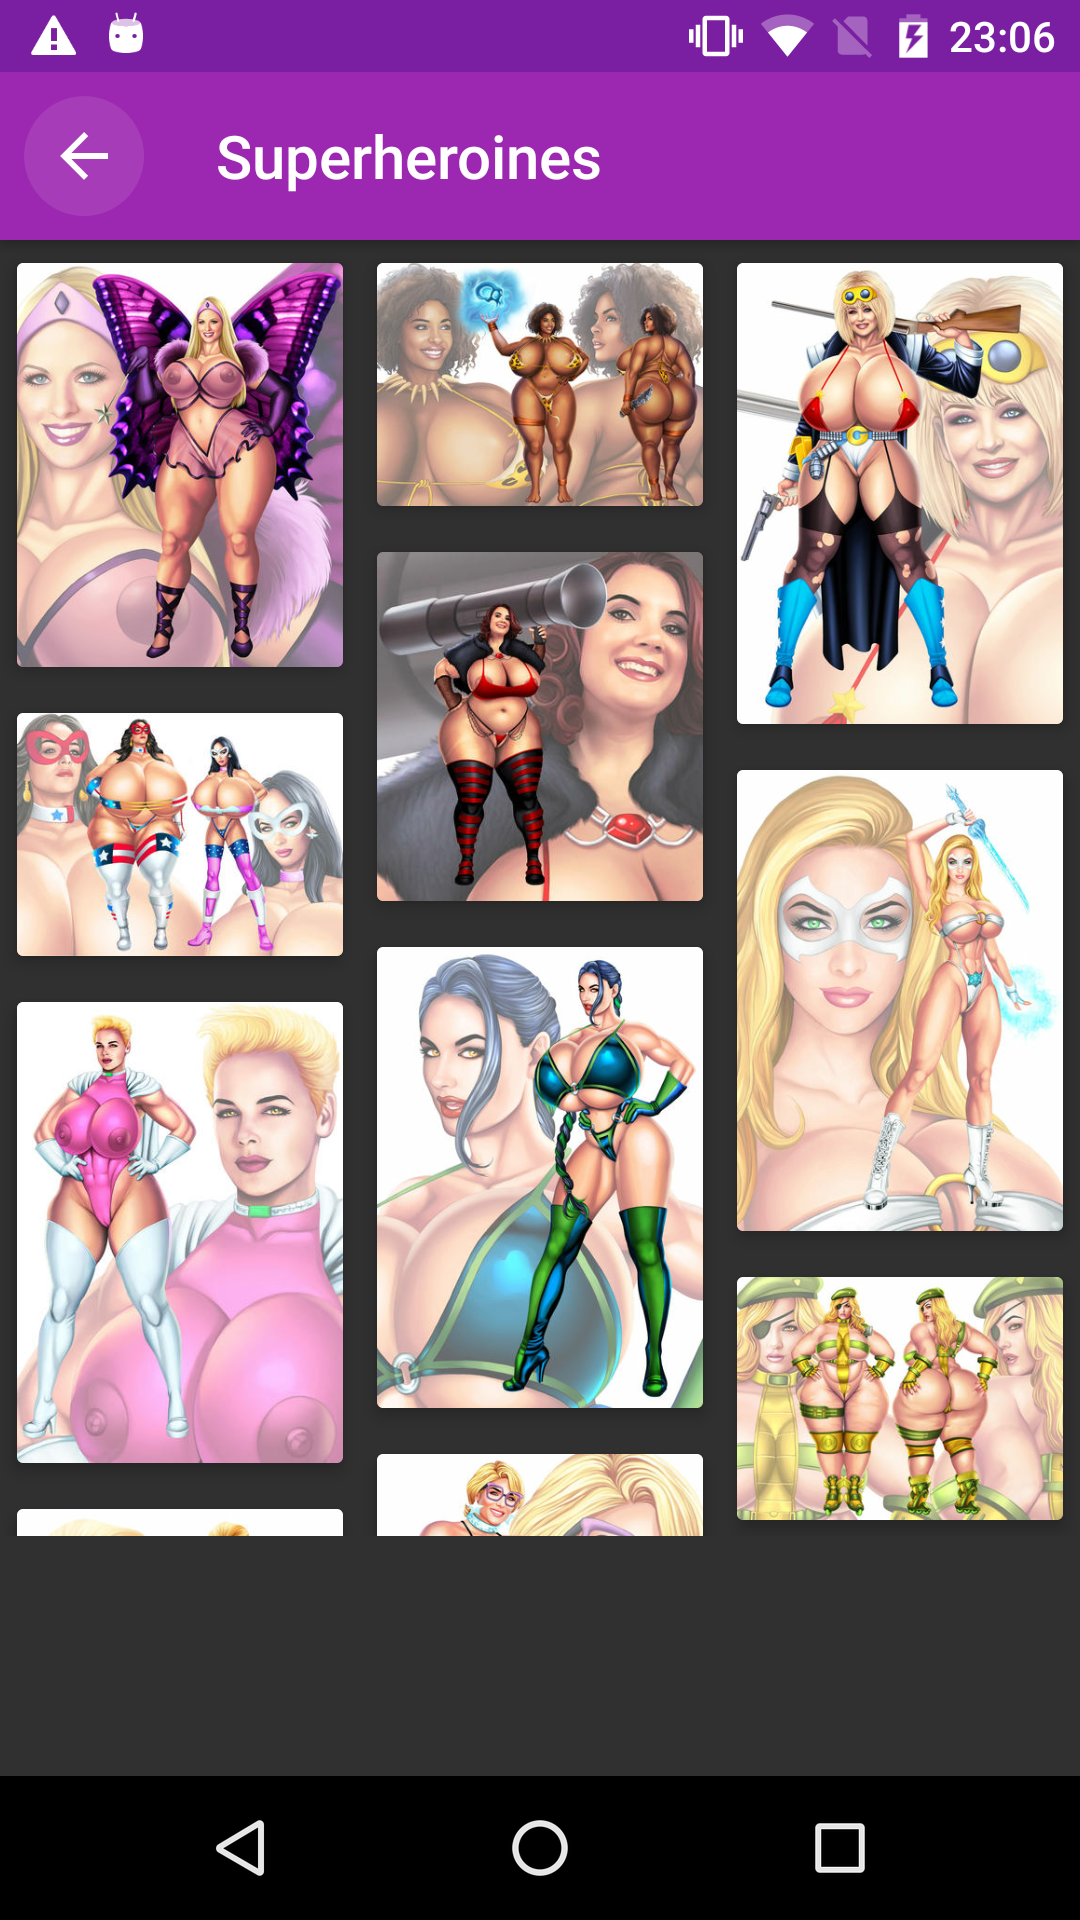 Superheroines sexy,app,hentai,anime,gallery,hotebonypics,apps,mature,hot,wallpapers,panties,puzzles,android,mobile,best,apk,collection,adult,comics,superheroines,sissy,porn,download